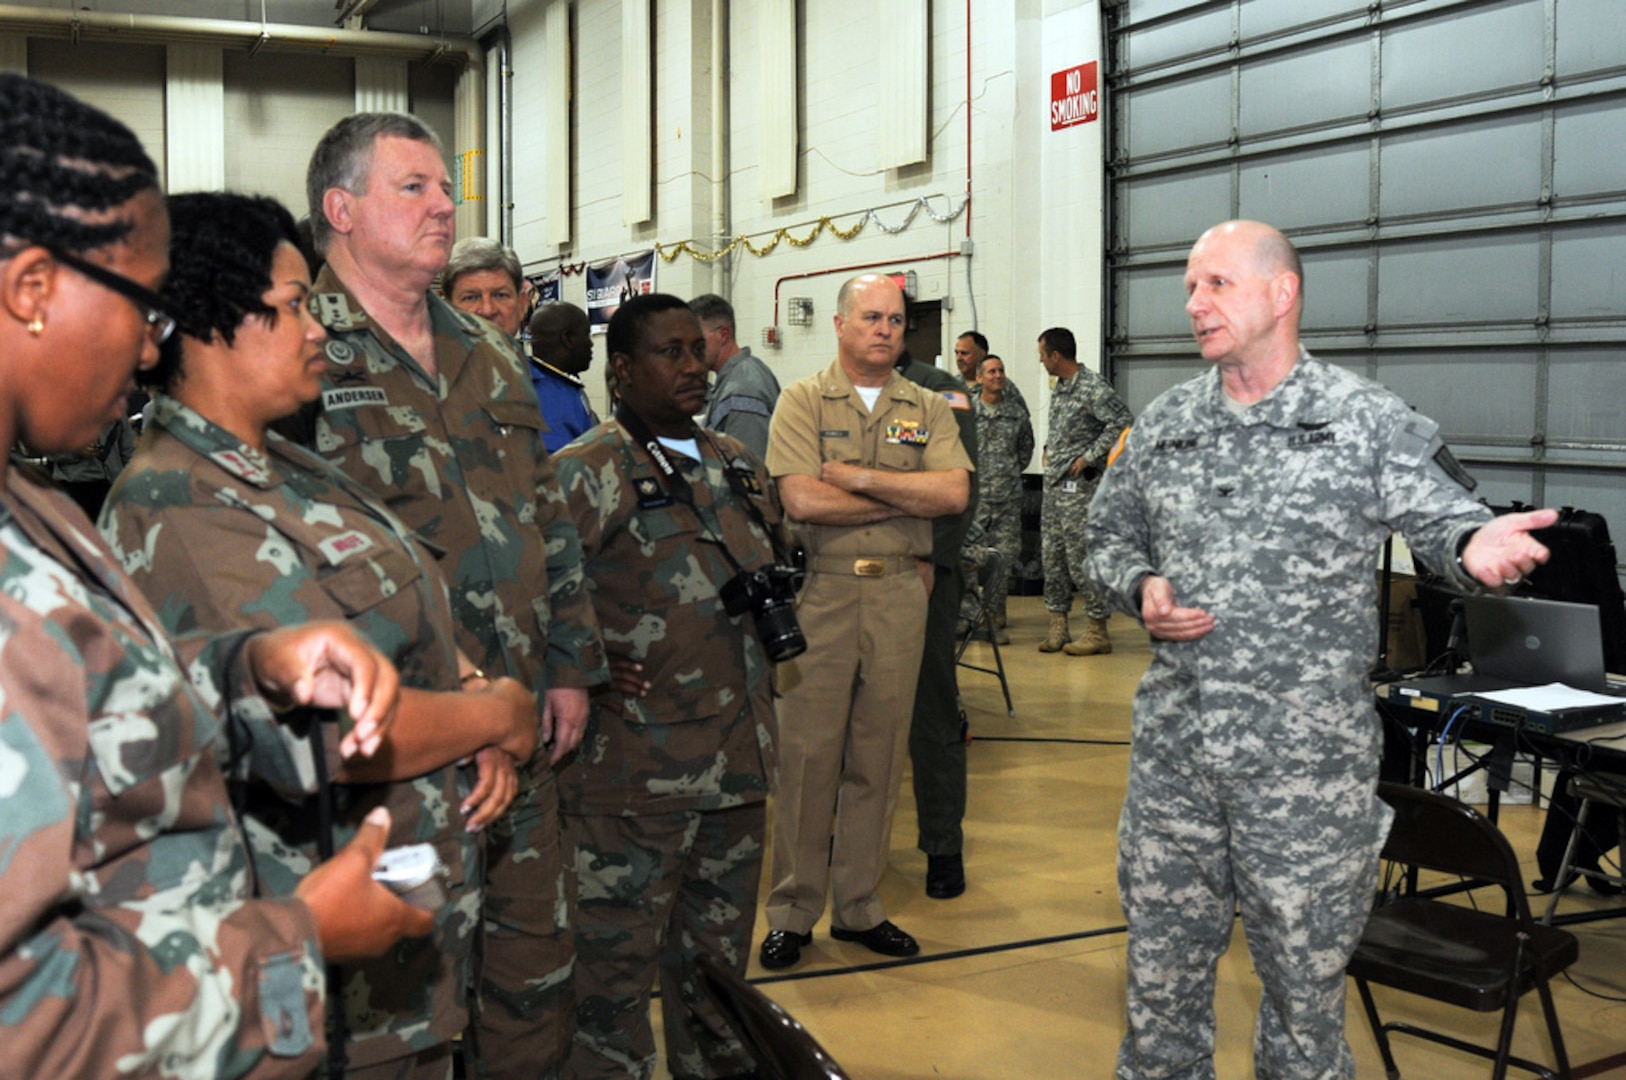 Army Col. Craig Meinking, a member of the New York Army National Guard, explains New York Army National Guard health-check procedures to South African Maj. Gen. Roy Andersen (center) and other South African National Defense Force Reserves officers during a Dec. 1, 2010 visit in Latham, N.Y.